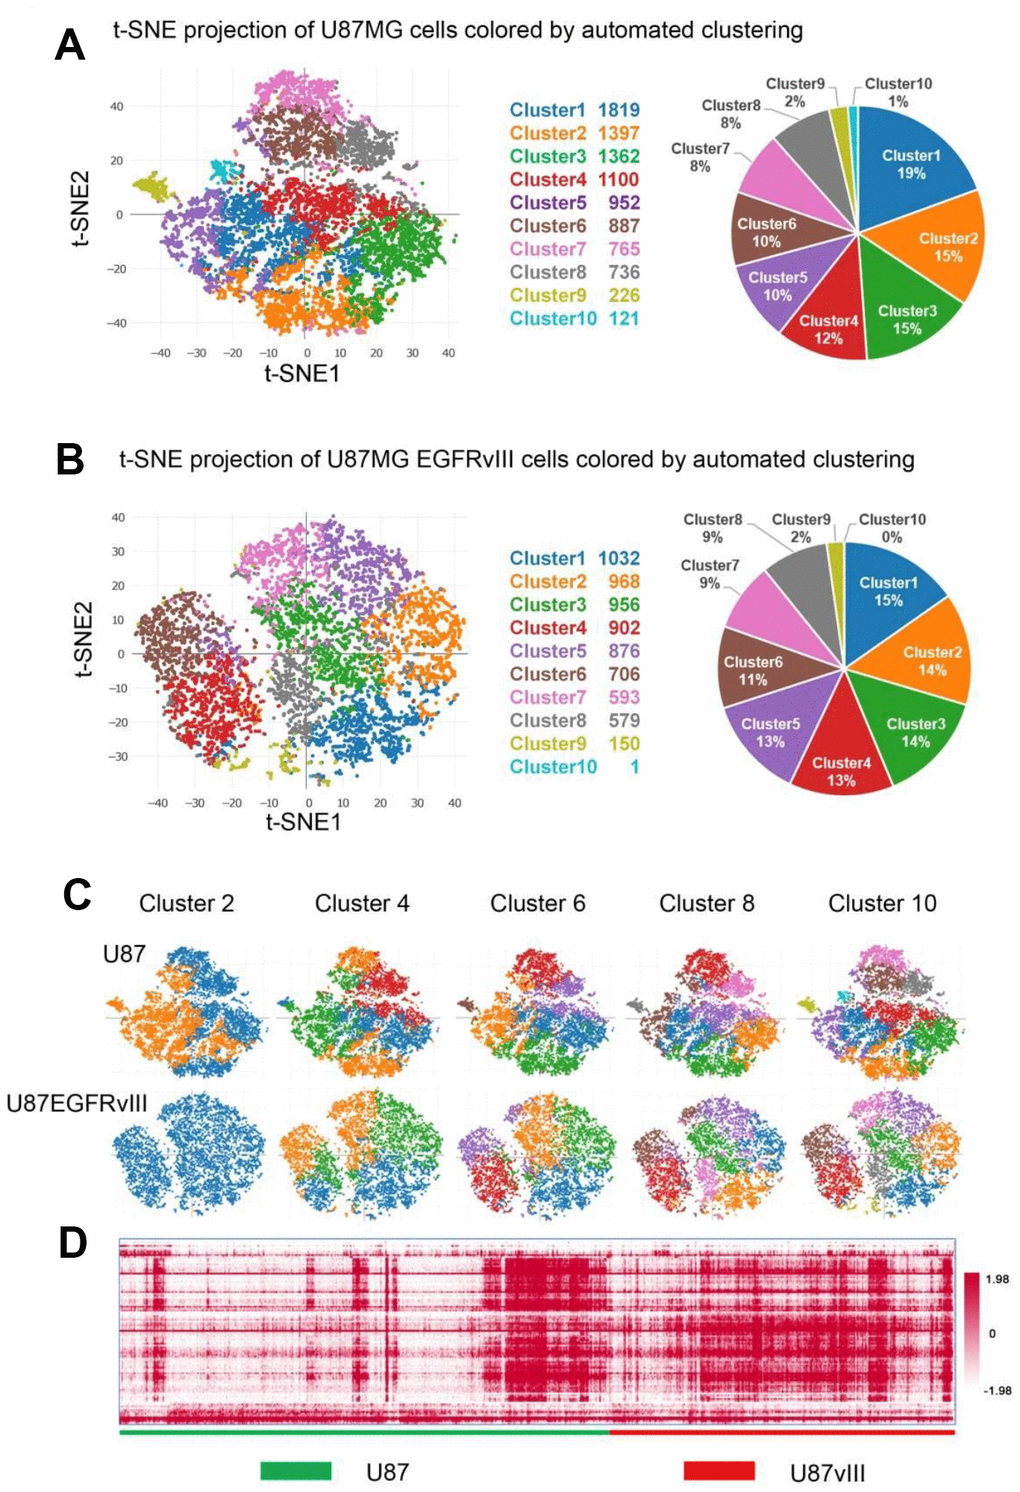 Single-cell analyses of U87MG and U87MG-EGFRvIII cells. U87MG-EGFRvIII cells were less heterogeneous than U87MG cells. (A) Clustering analyses reveal ten subsets with cluster-specific genes and functions. The pie chart shows the percentage of each cluster. (B) The clustering results of U87MG-EGFRvIII cells (k=10) and the percentage of each cluster. (C) The clustering results with k values from two to ten. (D) The heatmap shows the gene expression of every single cell.